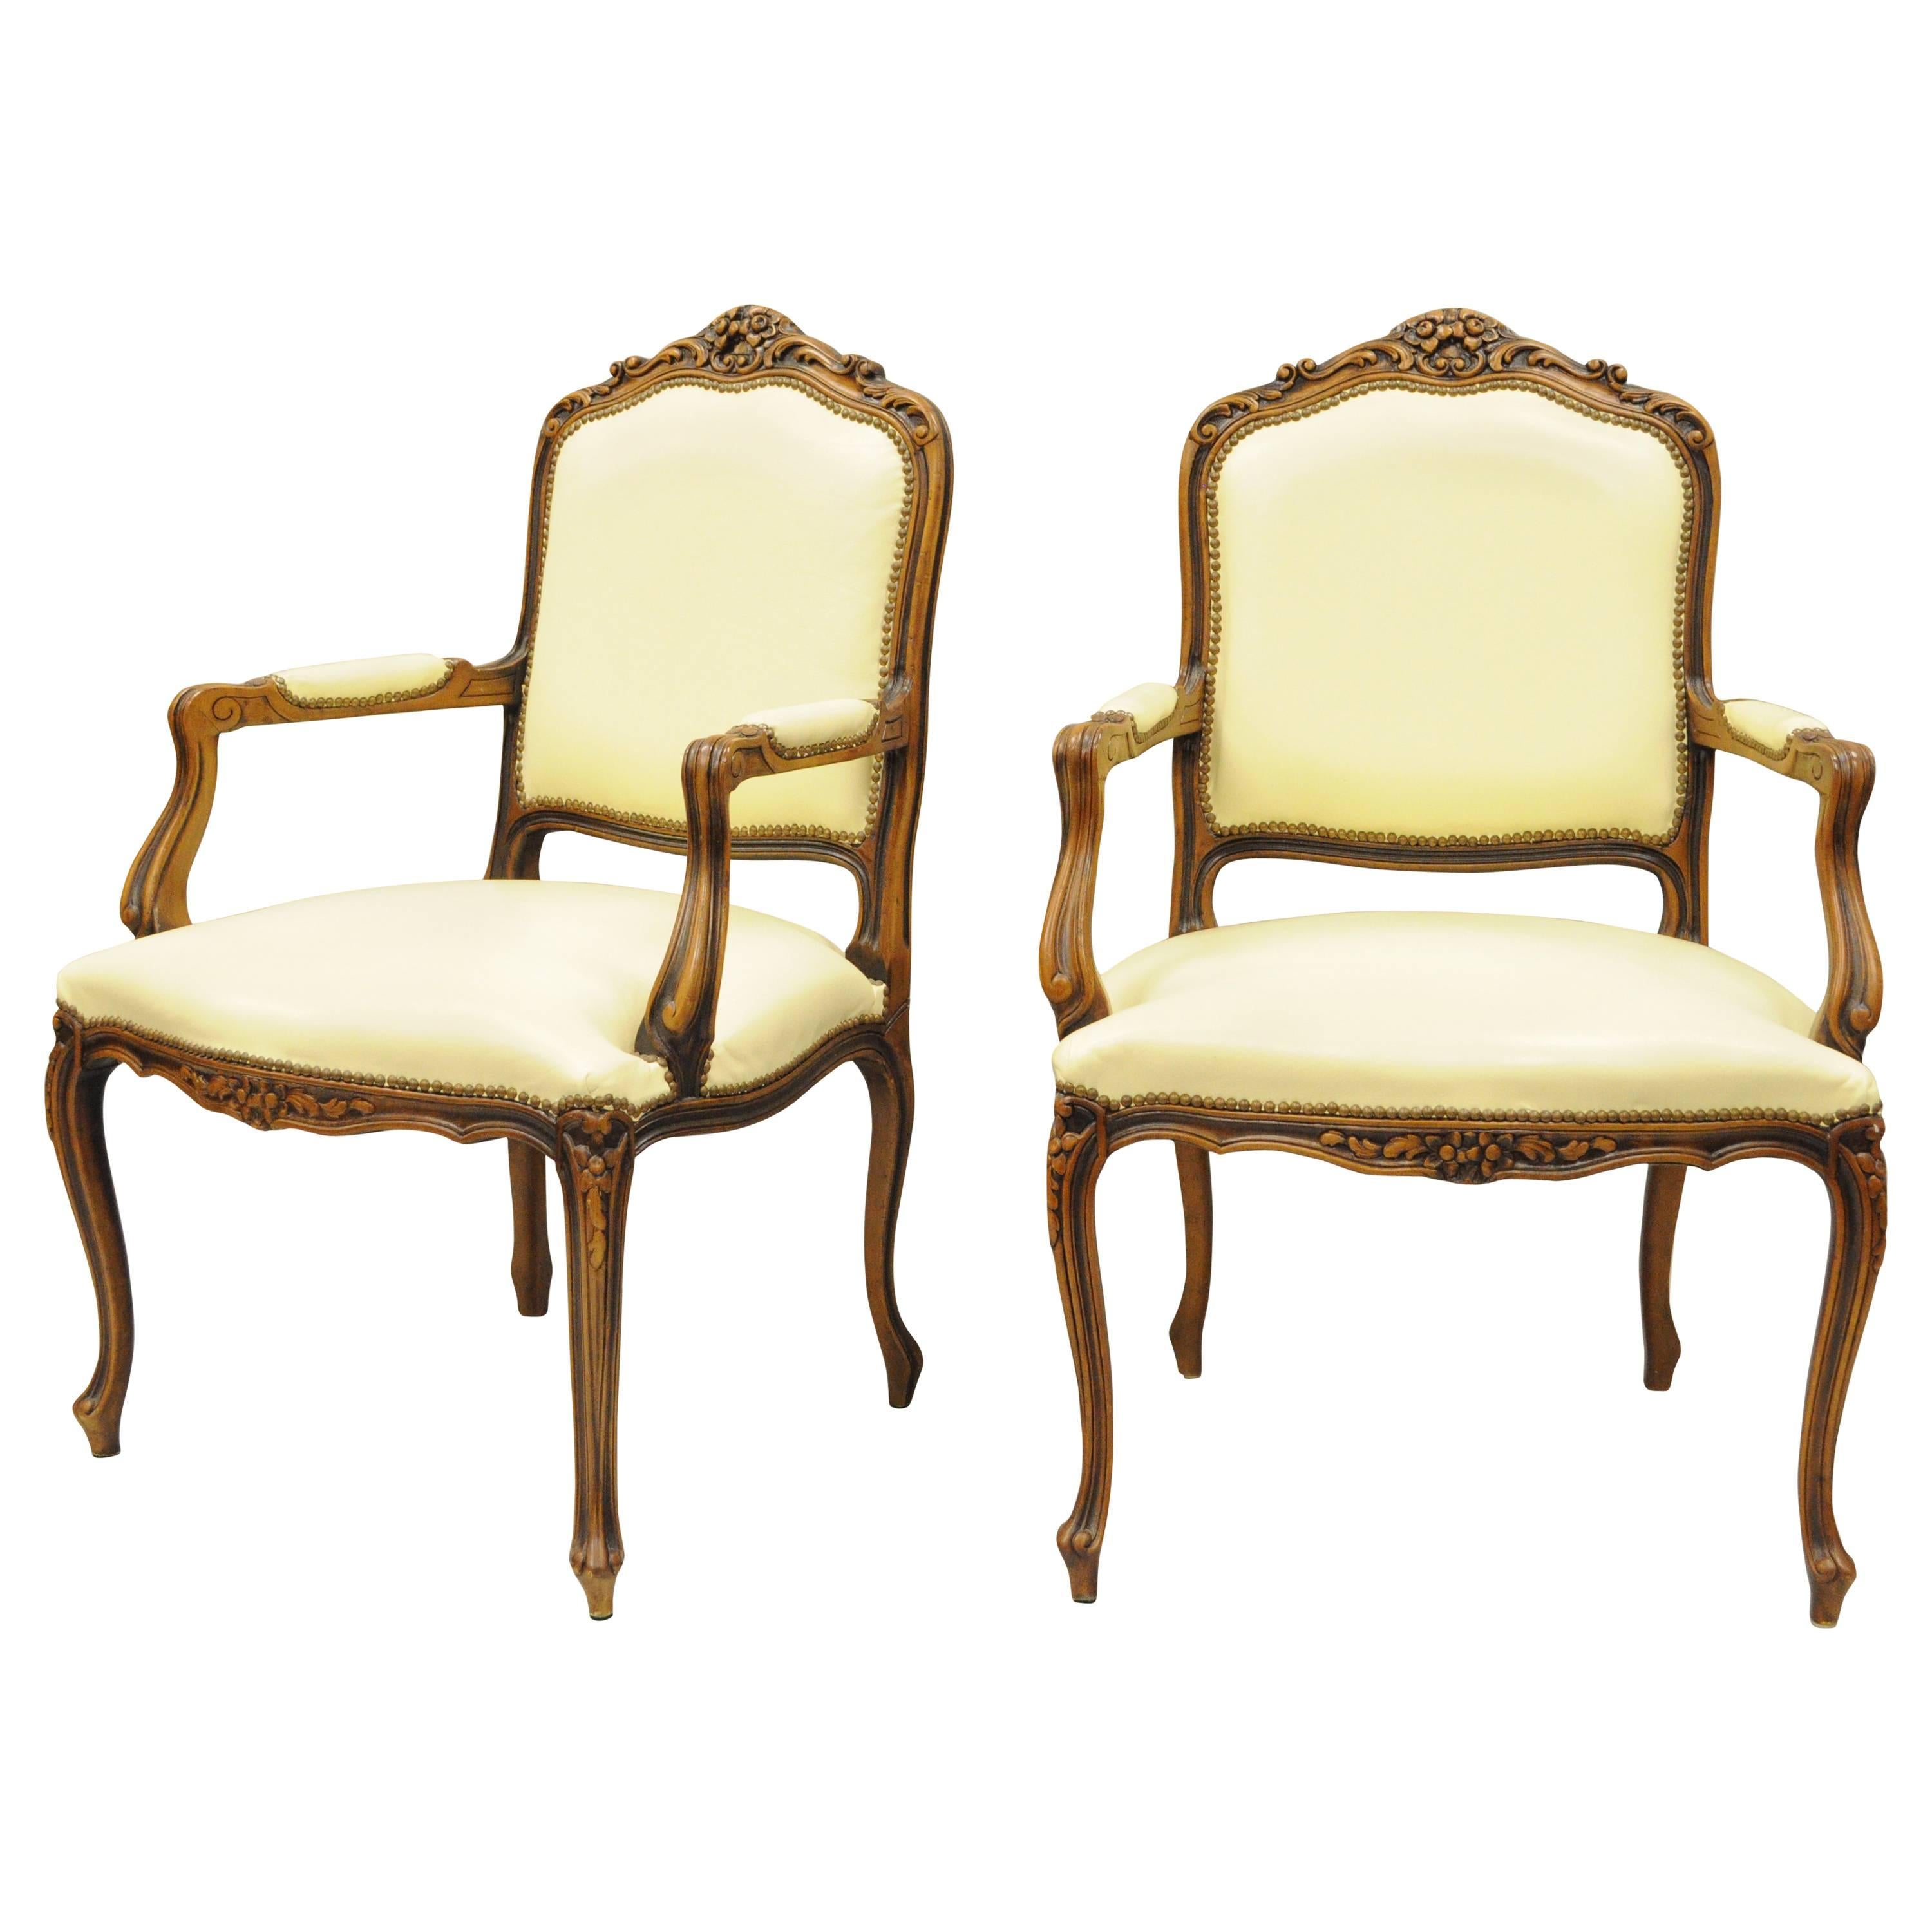 Pair of Vintage French Country Louis XV Style Italian Arm Chairs by Chateau d'Ax